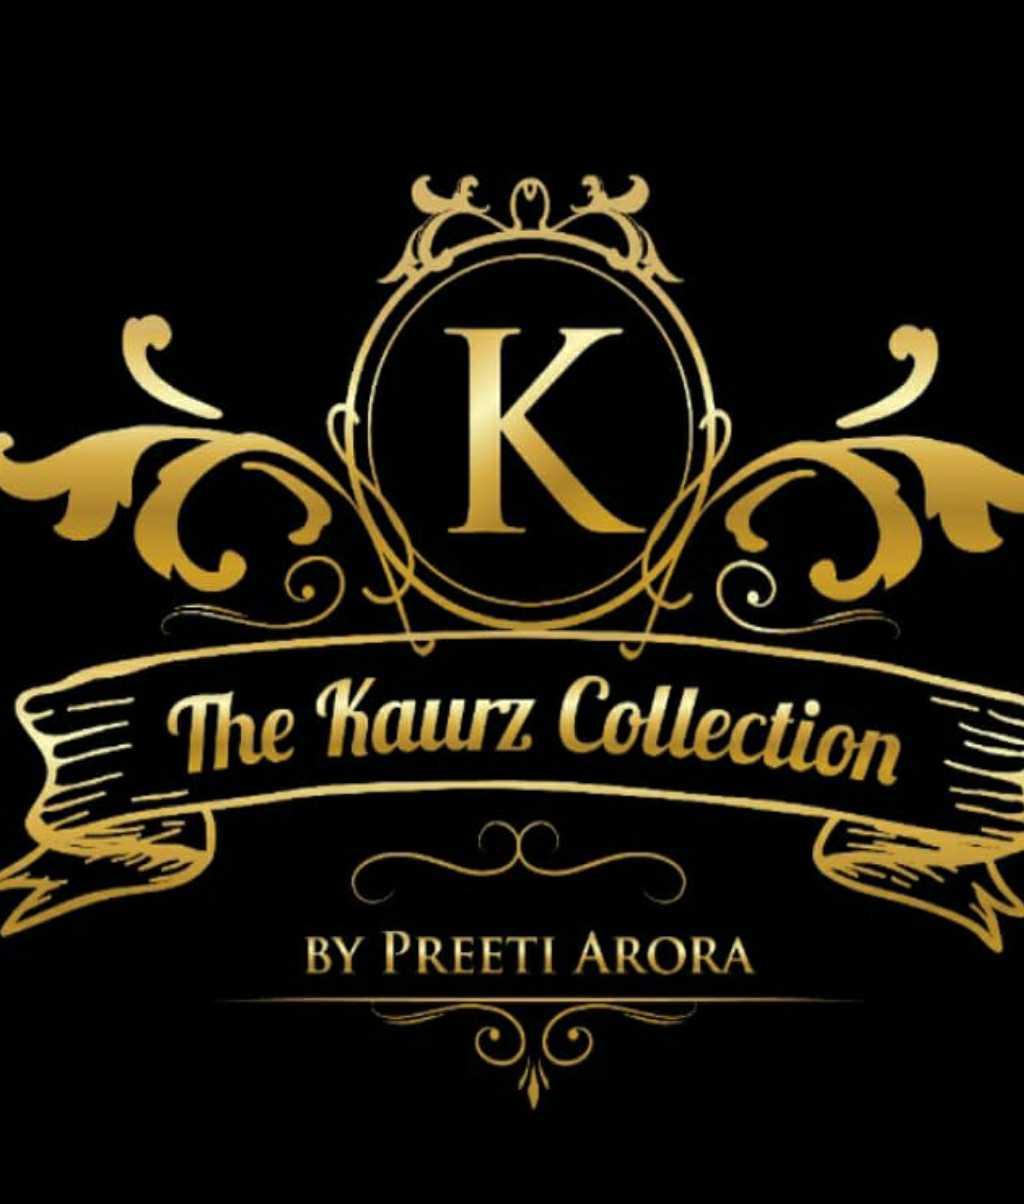 The Kaurz Collection